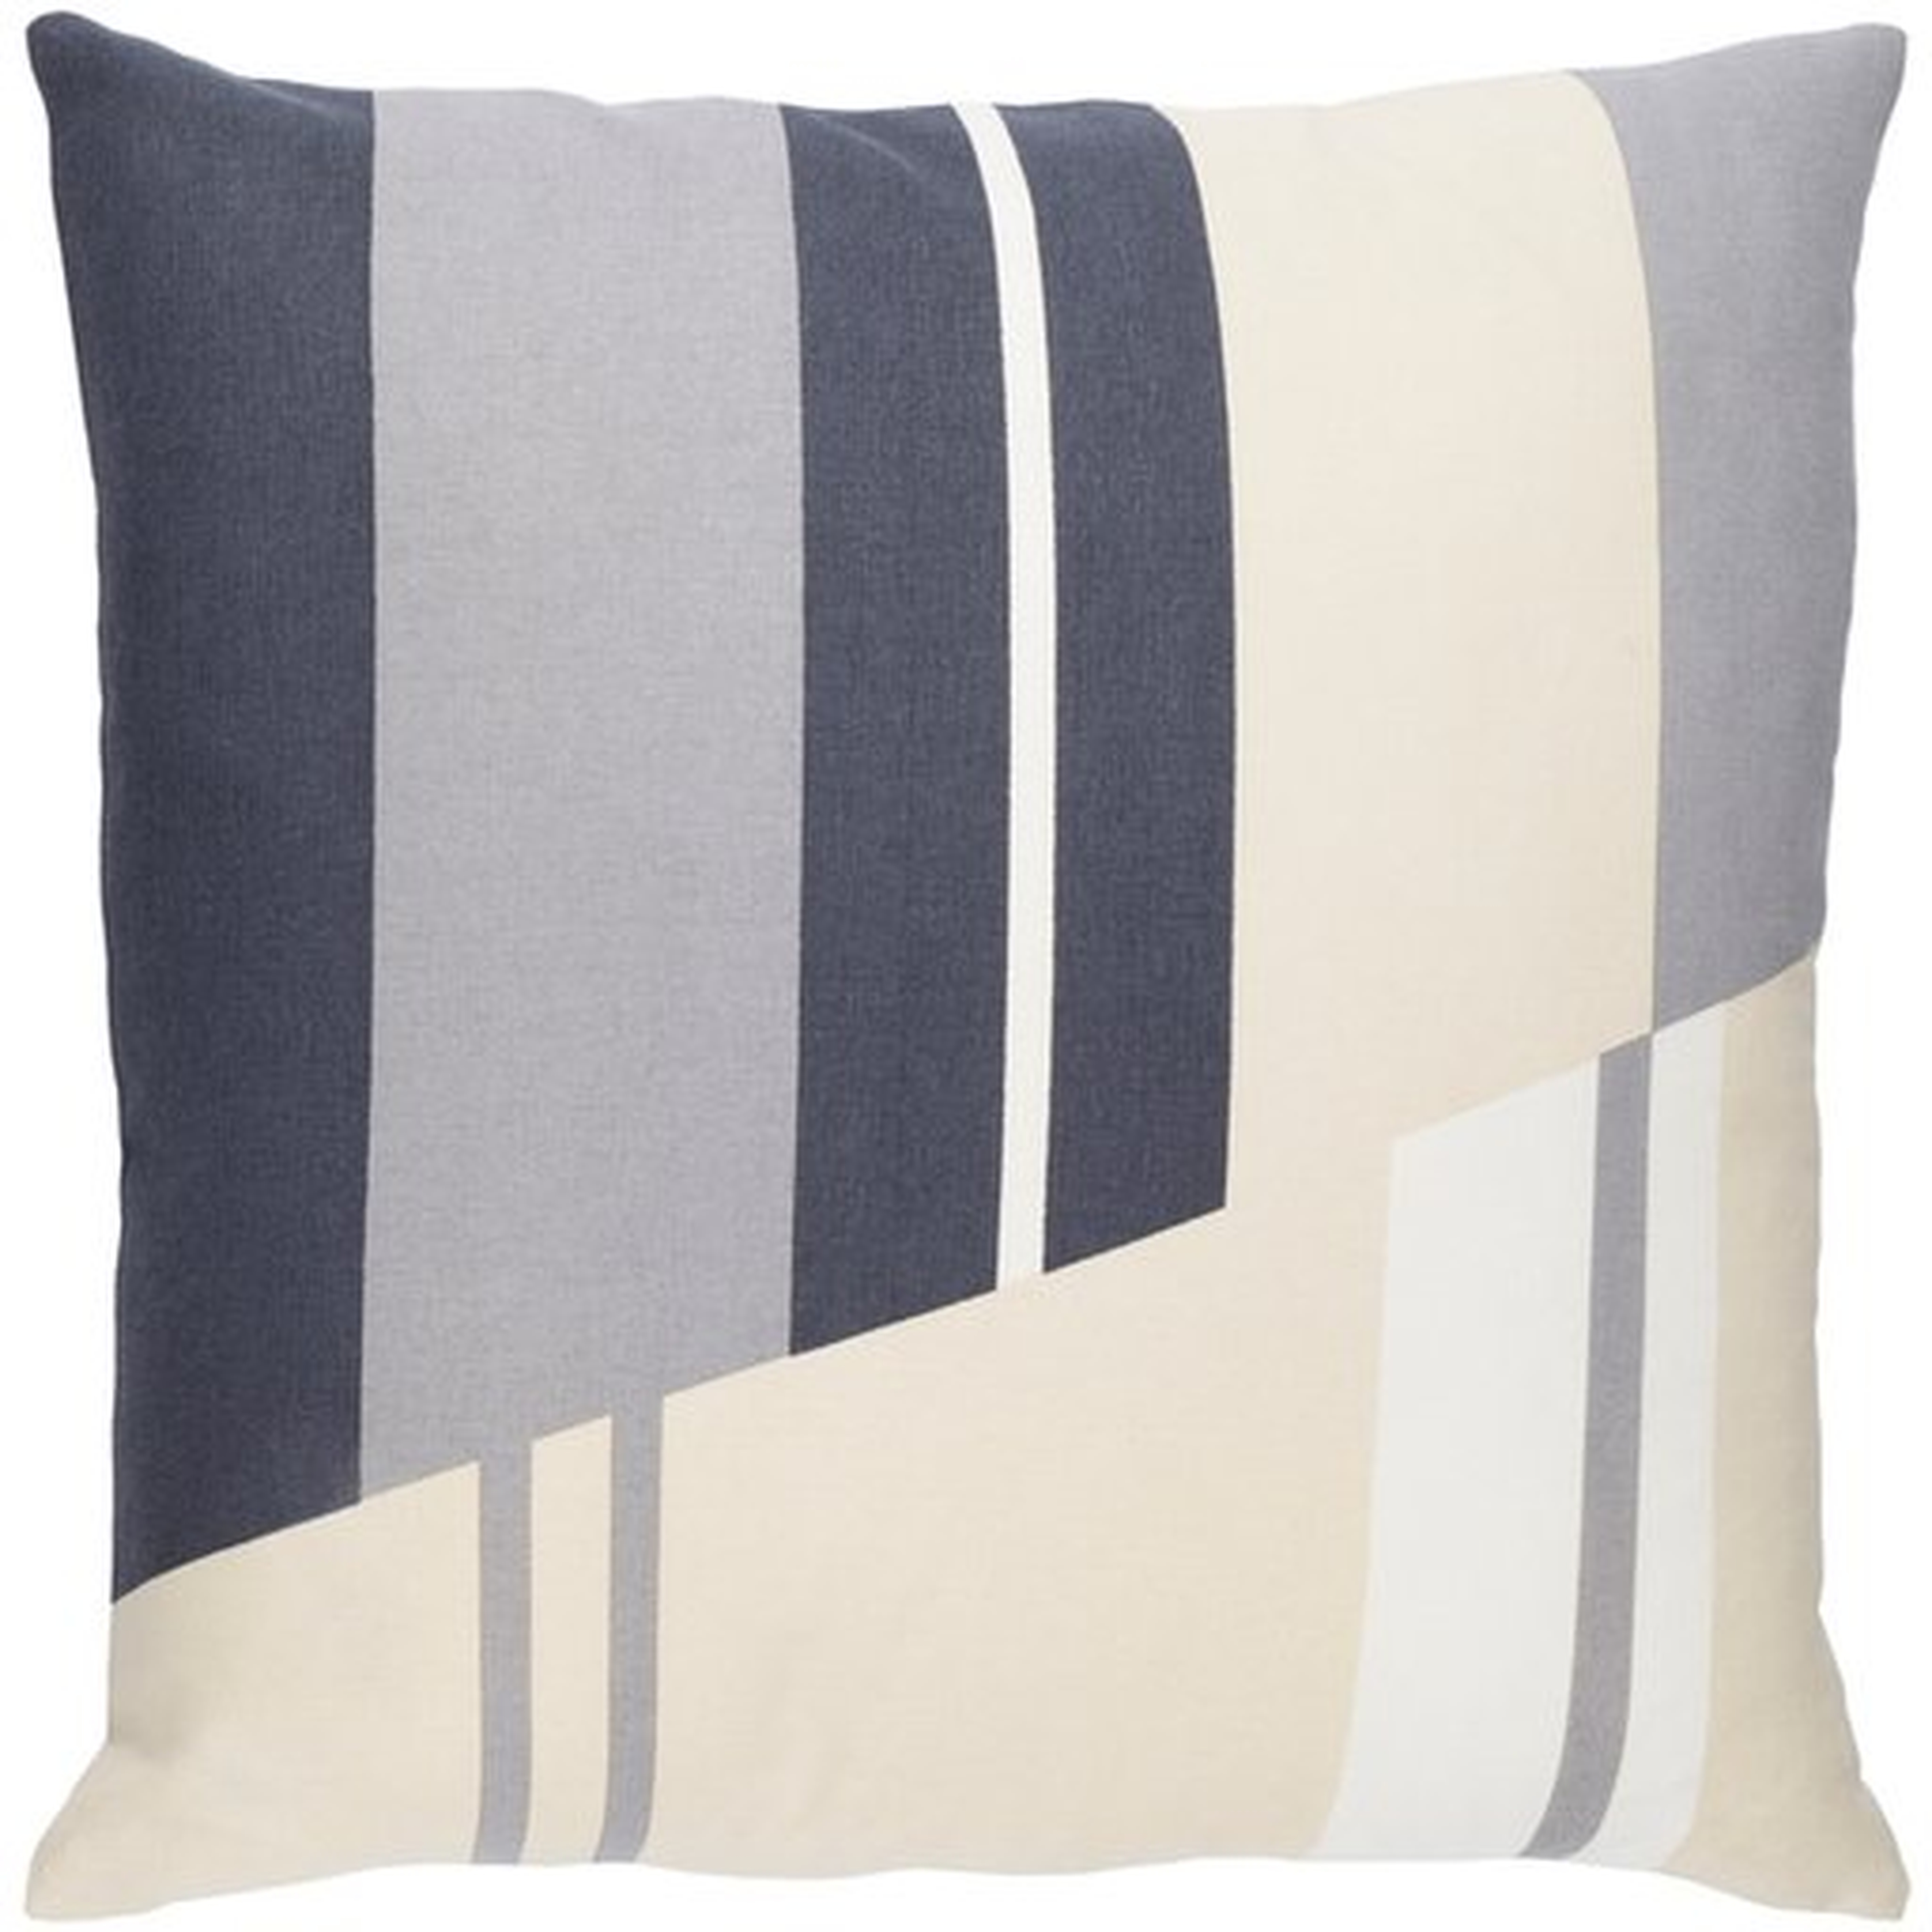 Lina Throw Pillow, 20" x 20", with down insert - Surya